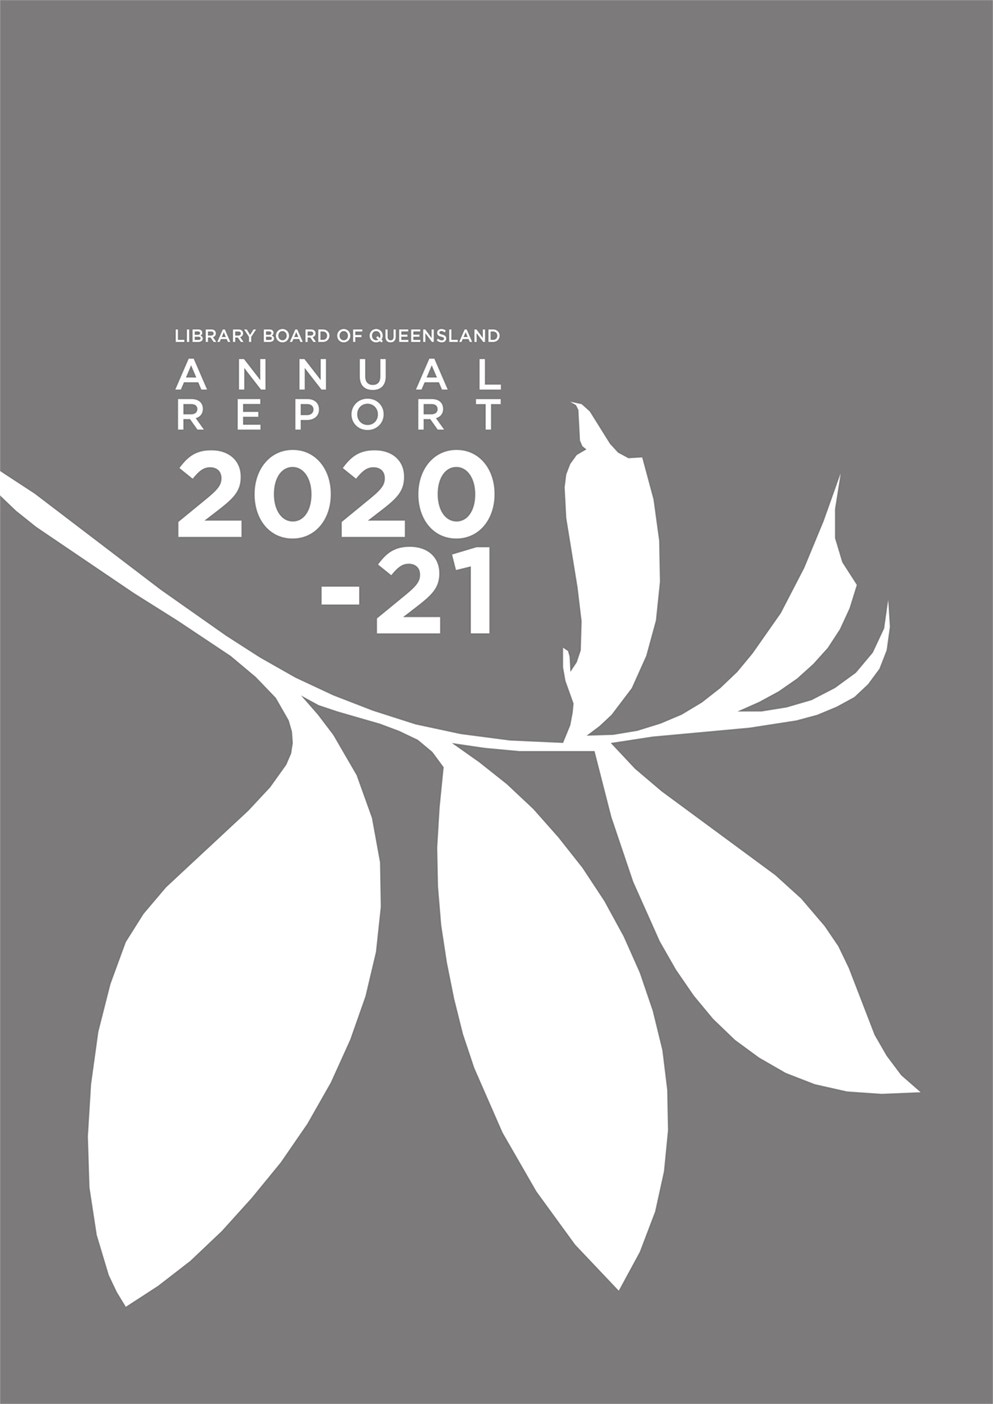 Library Board of Queensland 202021 Annual Report cover